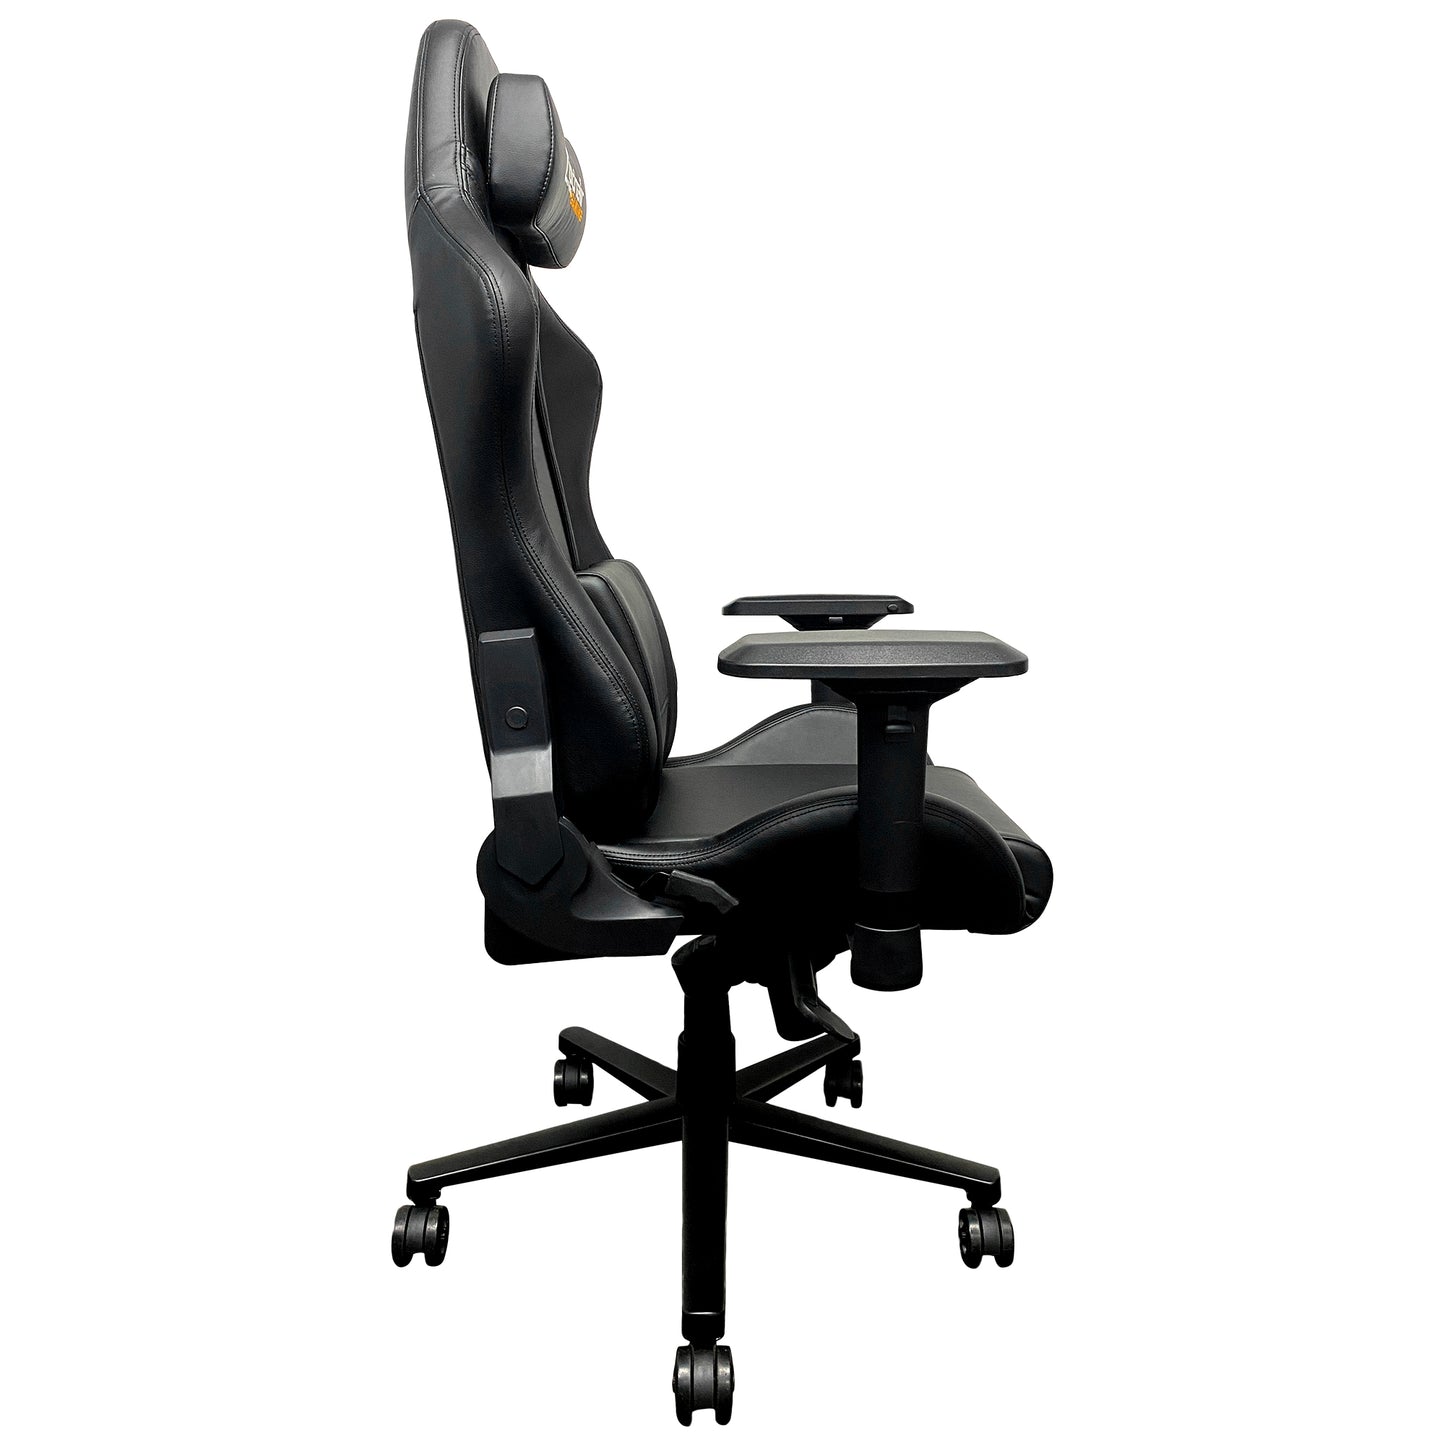 Xpression Pro Gaming Chair with Real Salt Lake Wordmark Logo